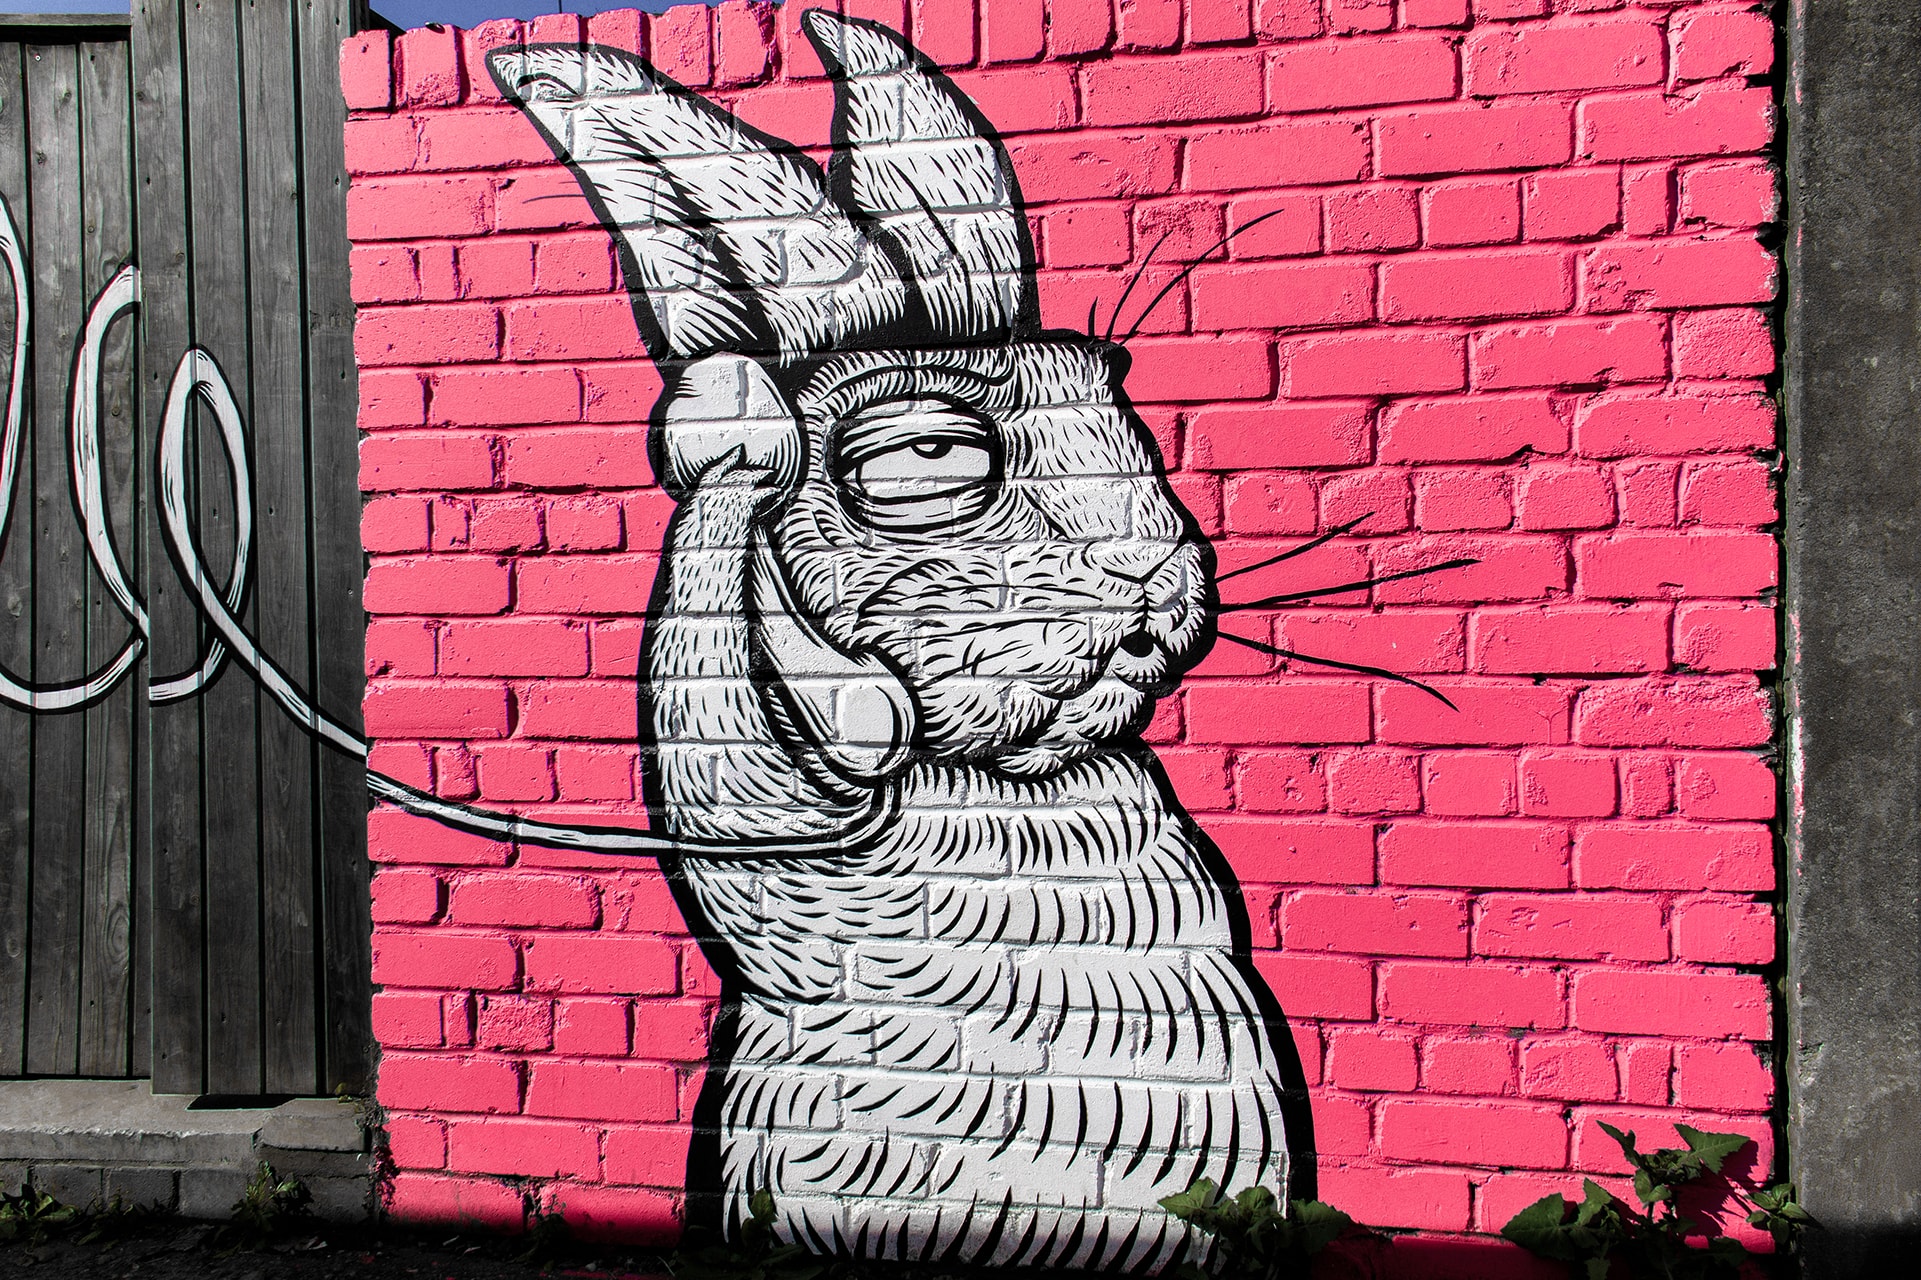 Wall art of a rabbit talking on the phone in front of a pink wall | Photo by Nick Fewings on Unsplash